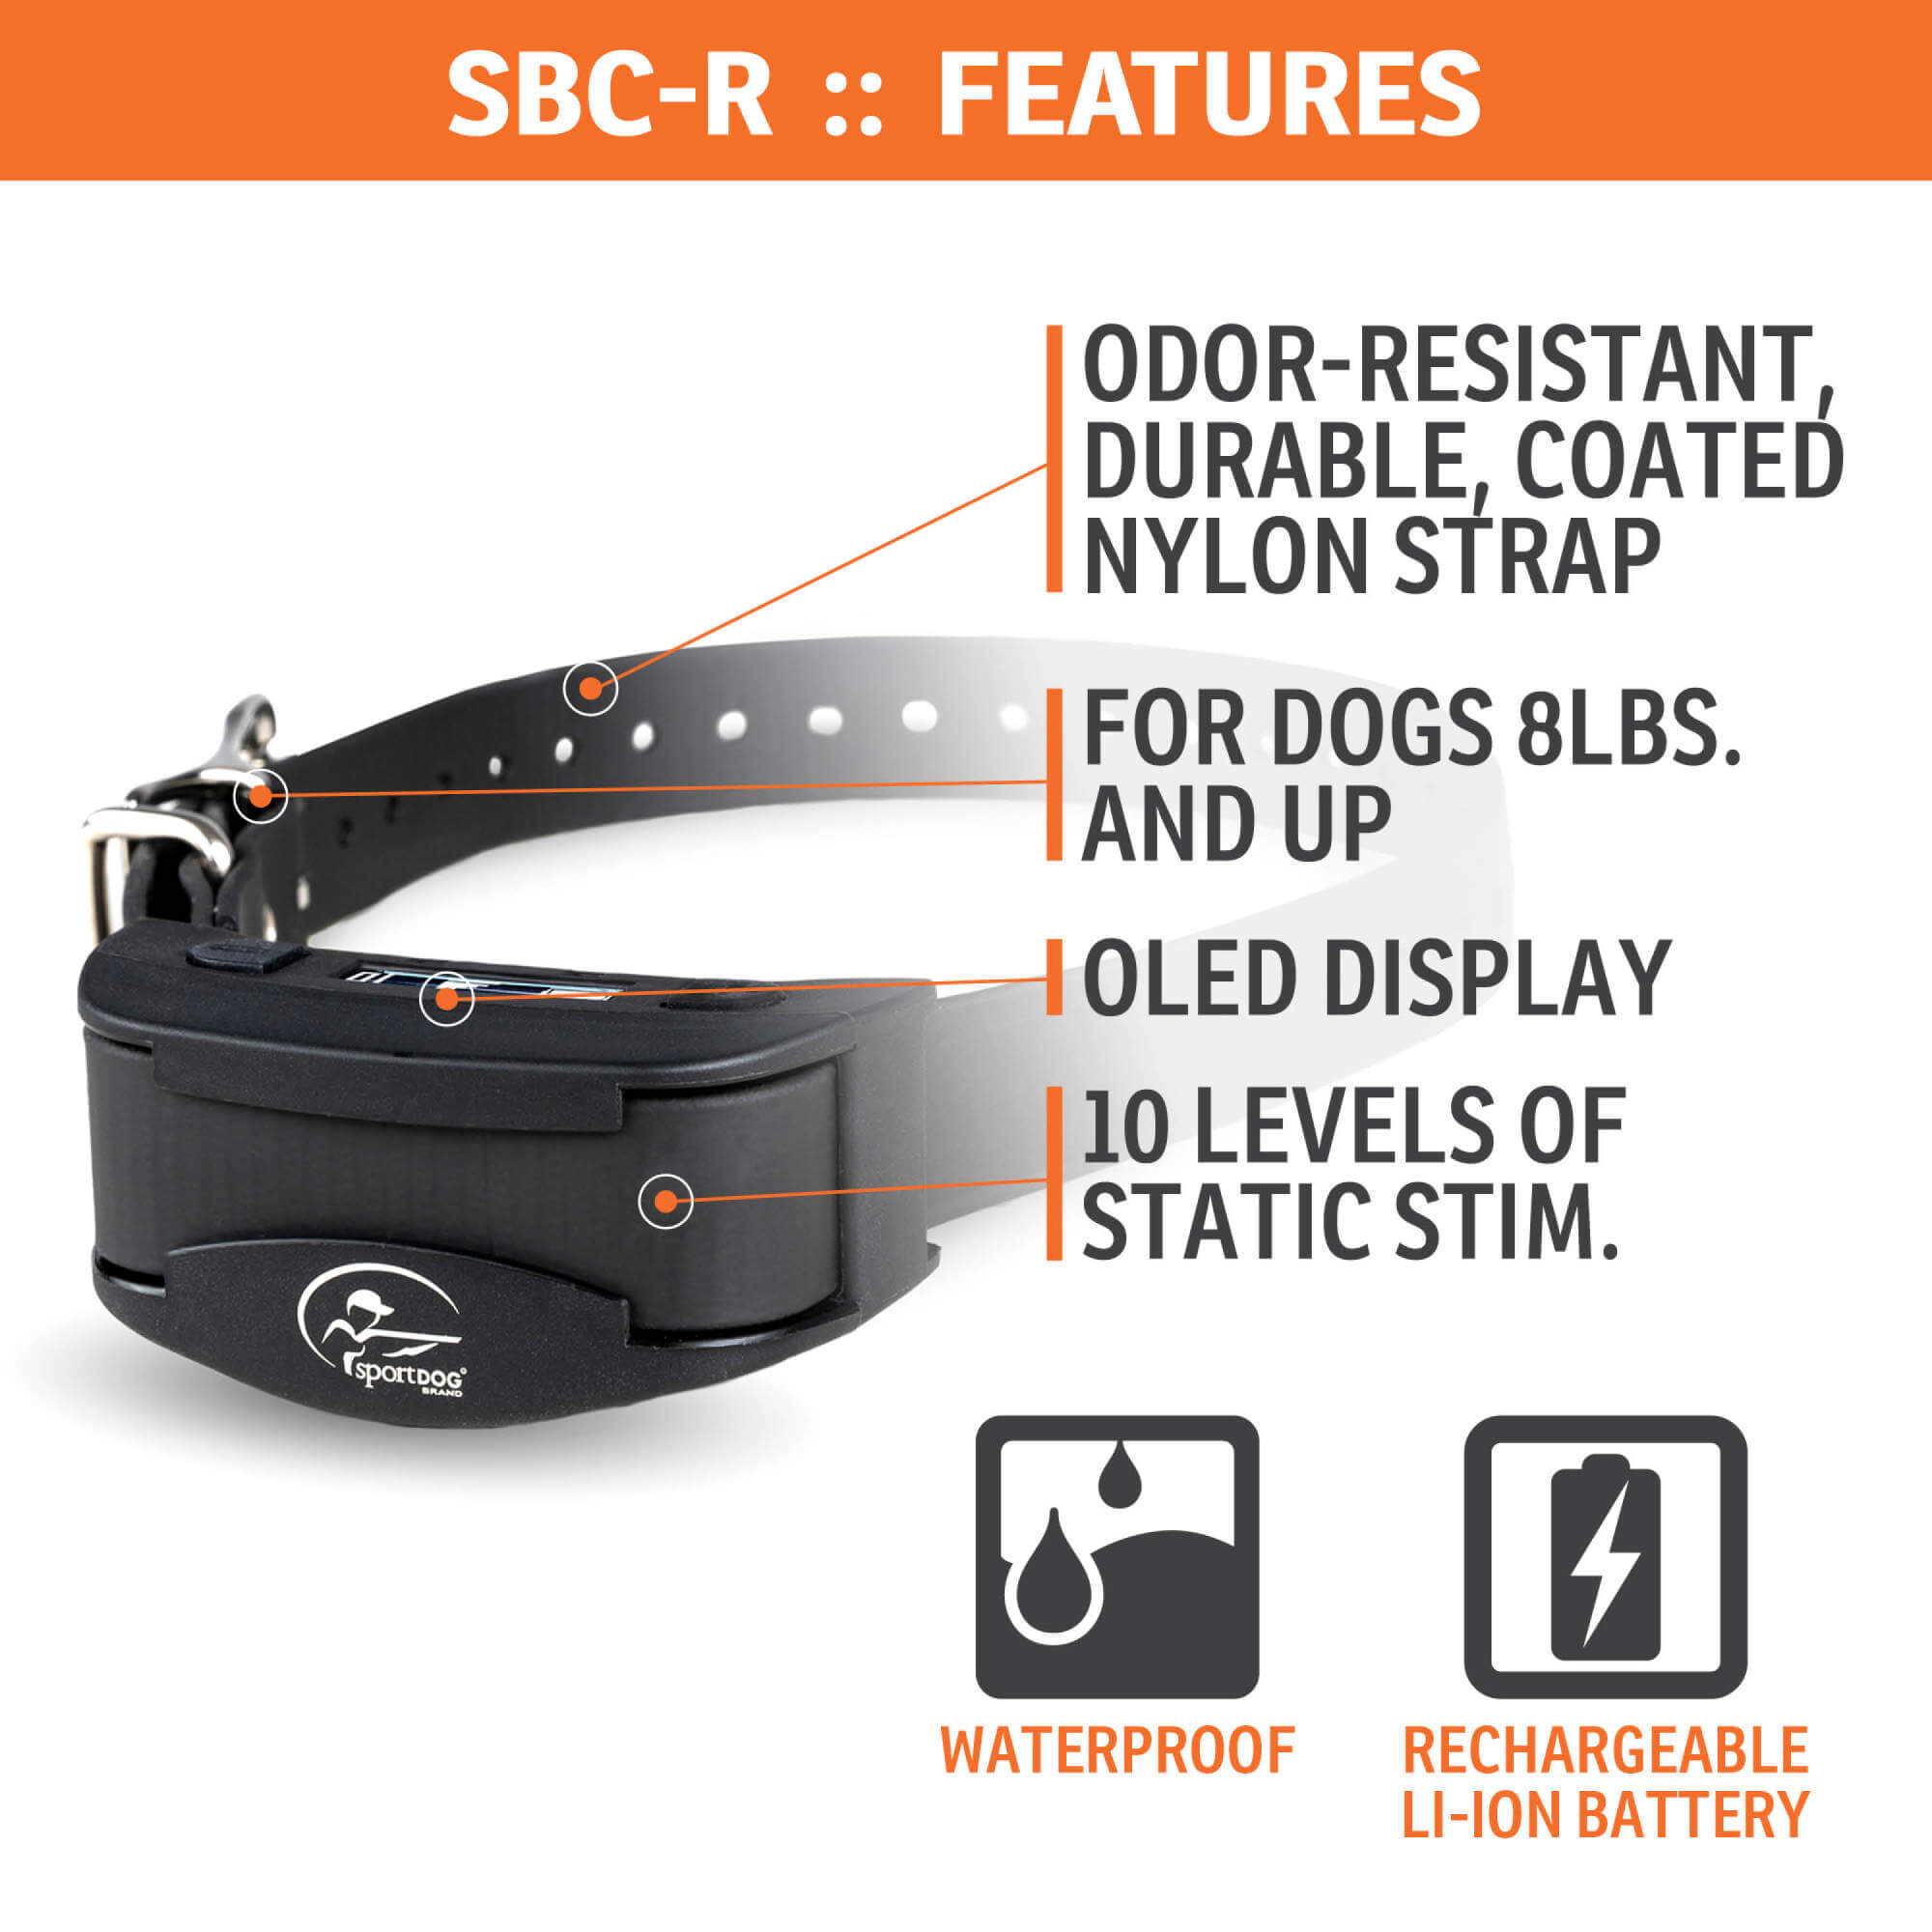 Sport Dog Collar SBC-R features 10 levels of static correction